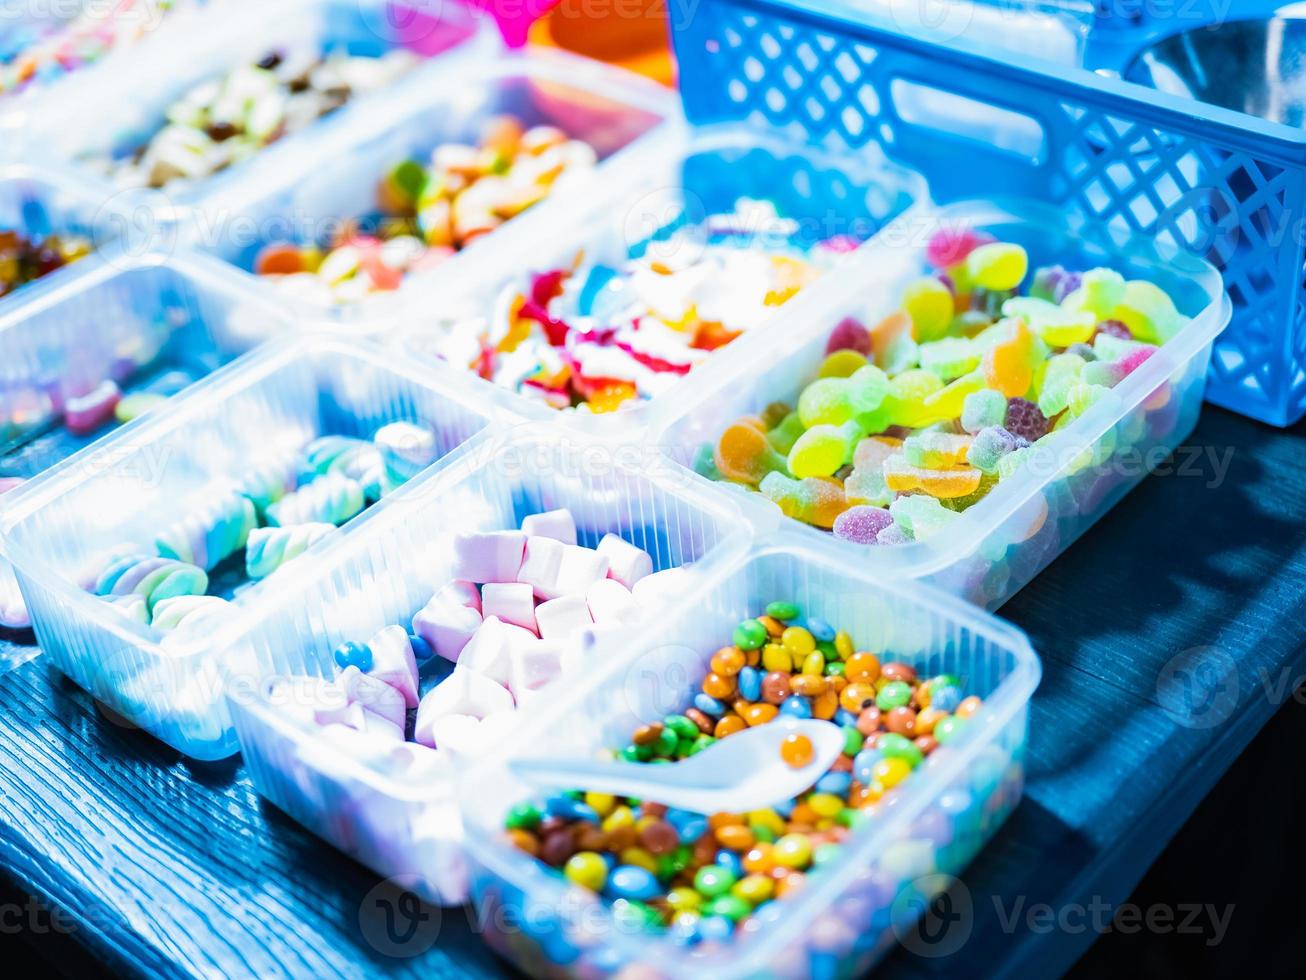 Sweets are sold in boxes and small baskets of jelly candies of various colors. photo